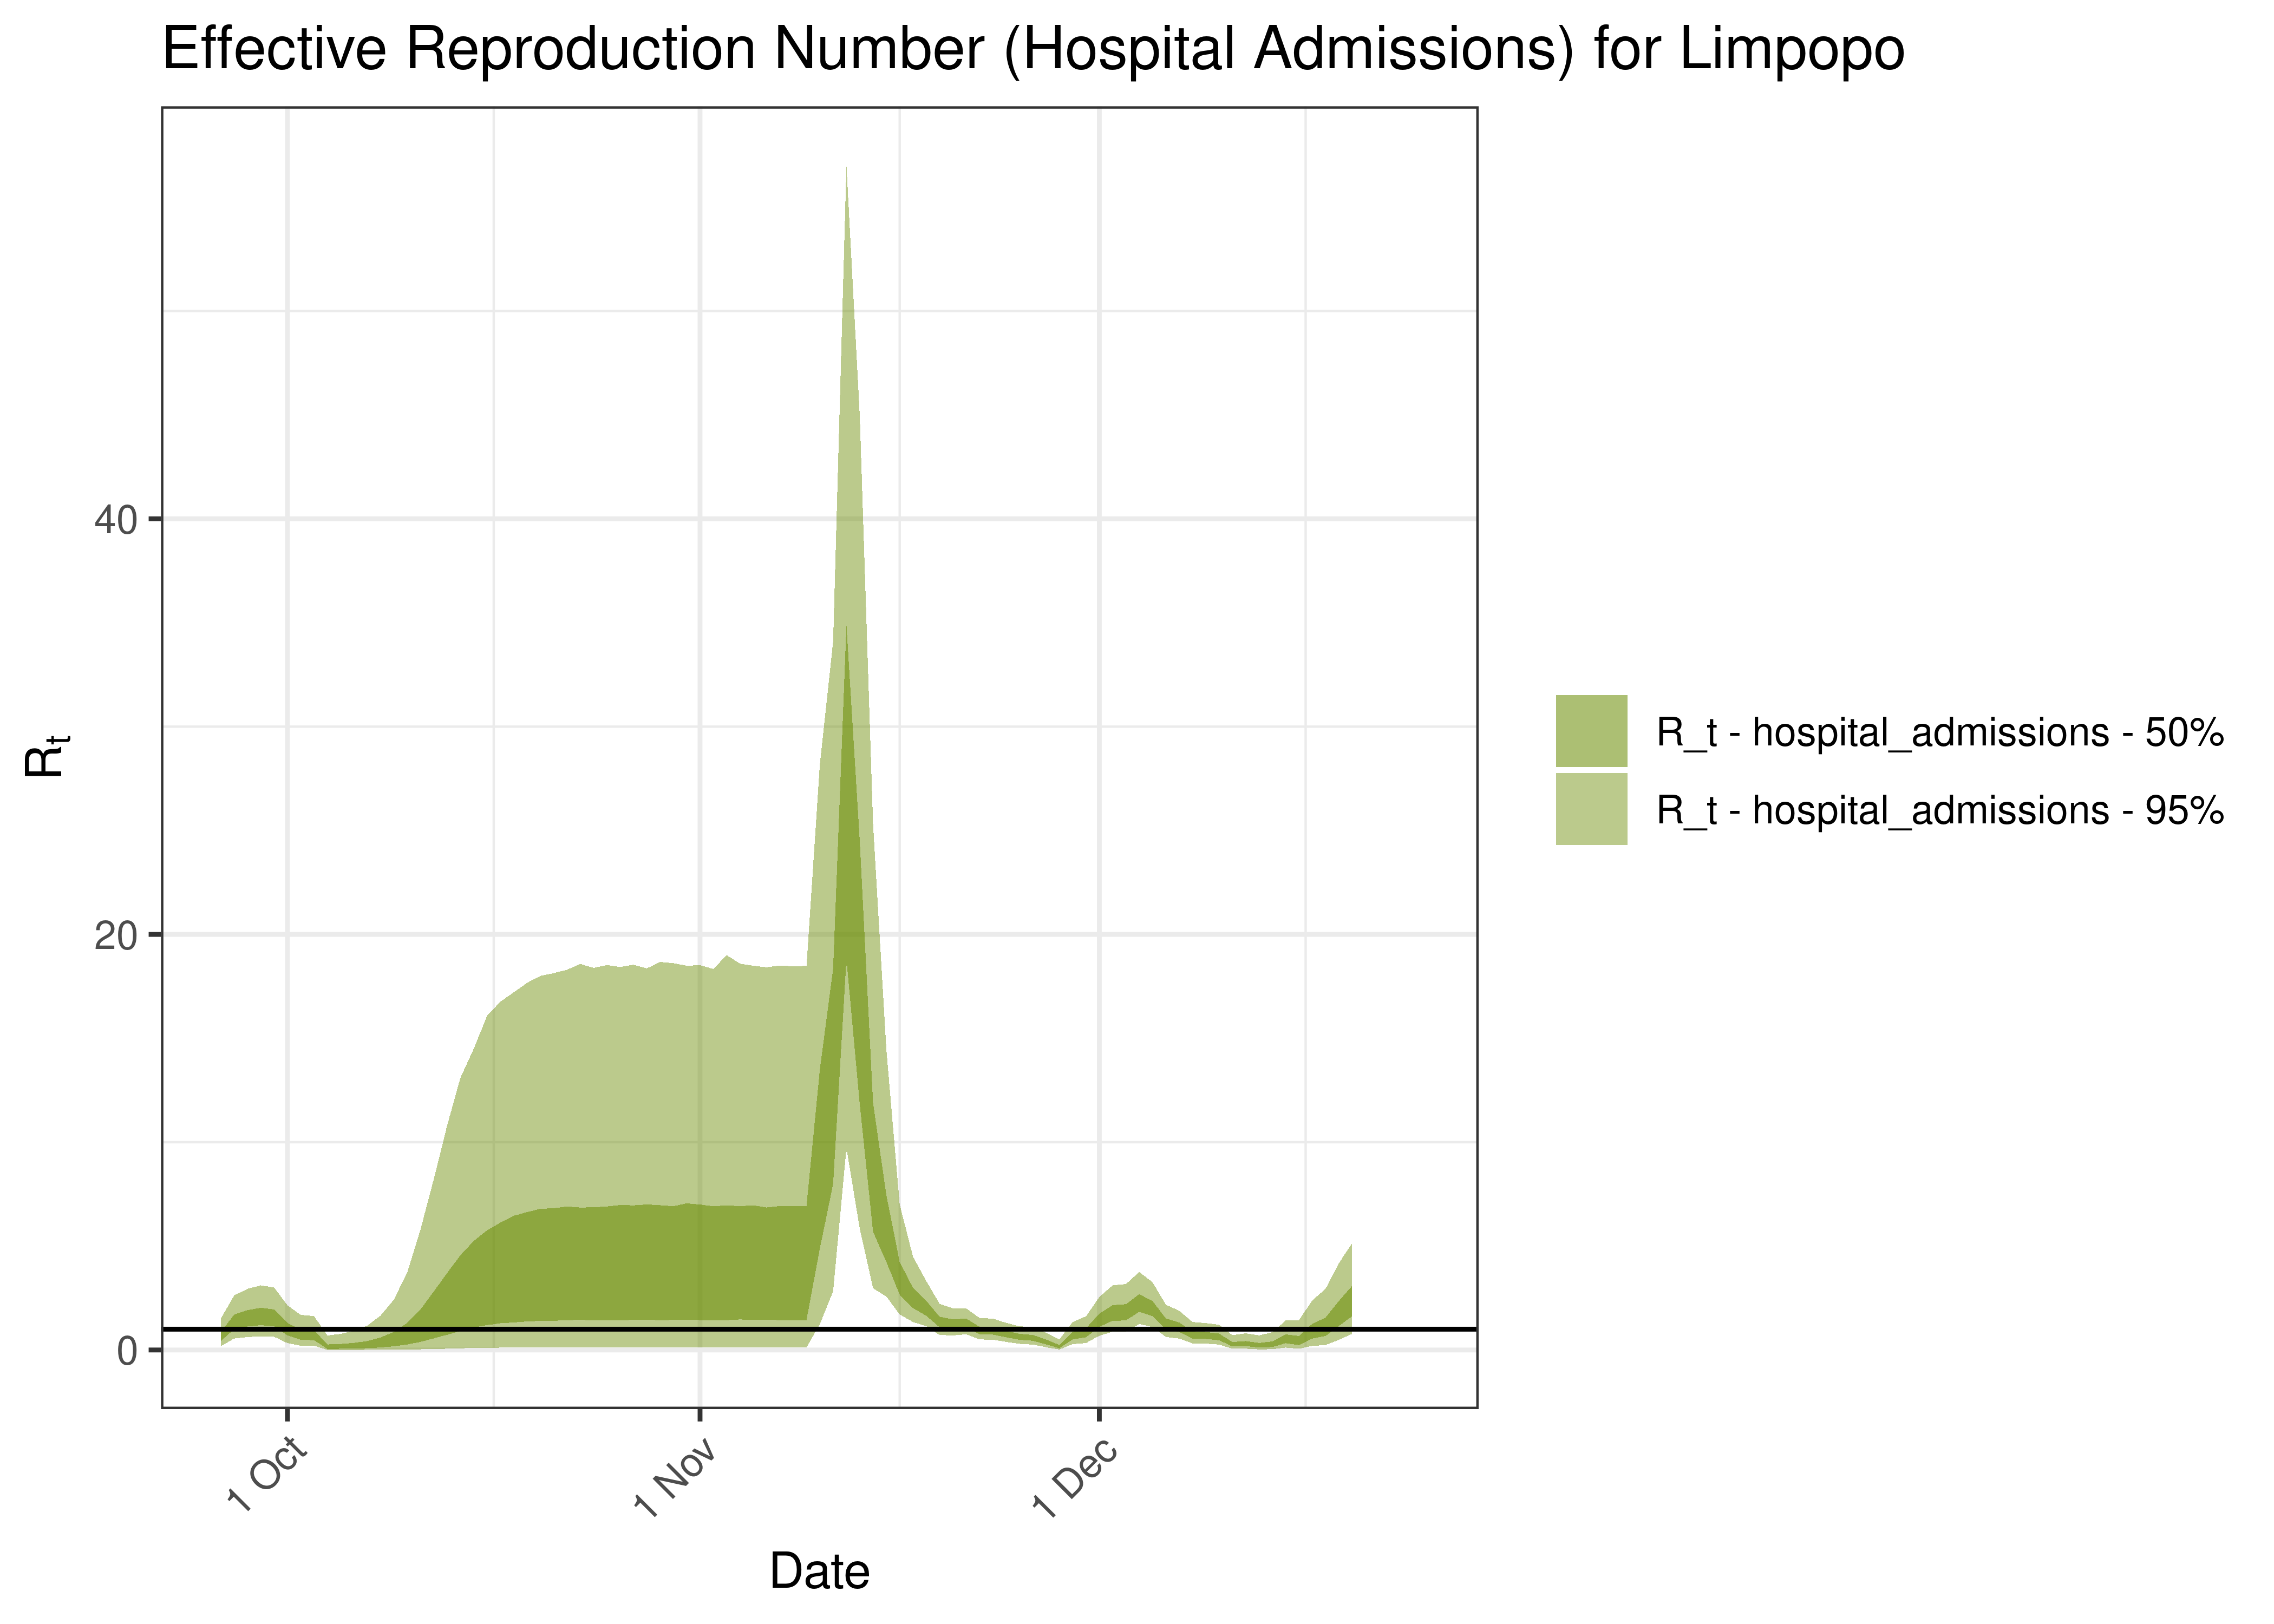 Estimated Effective Reproduction Number Based on Hospital Admissions for Limpopo over last 90 days